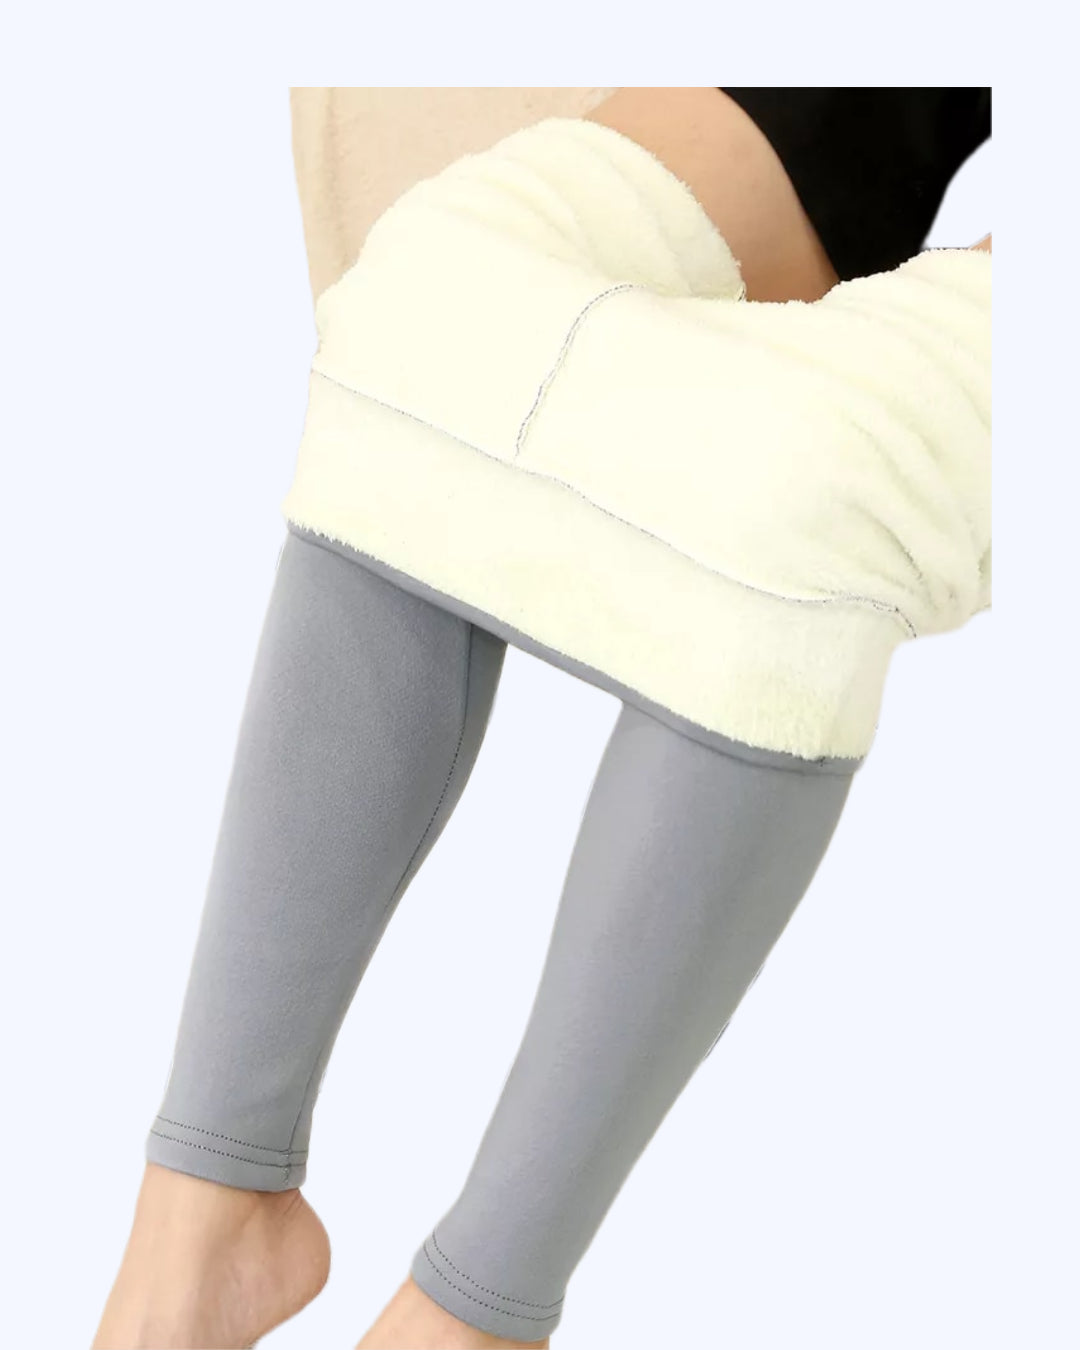 Cloudy Fleece Leggings: the ultimate winter warmth and style